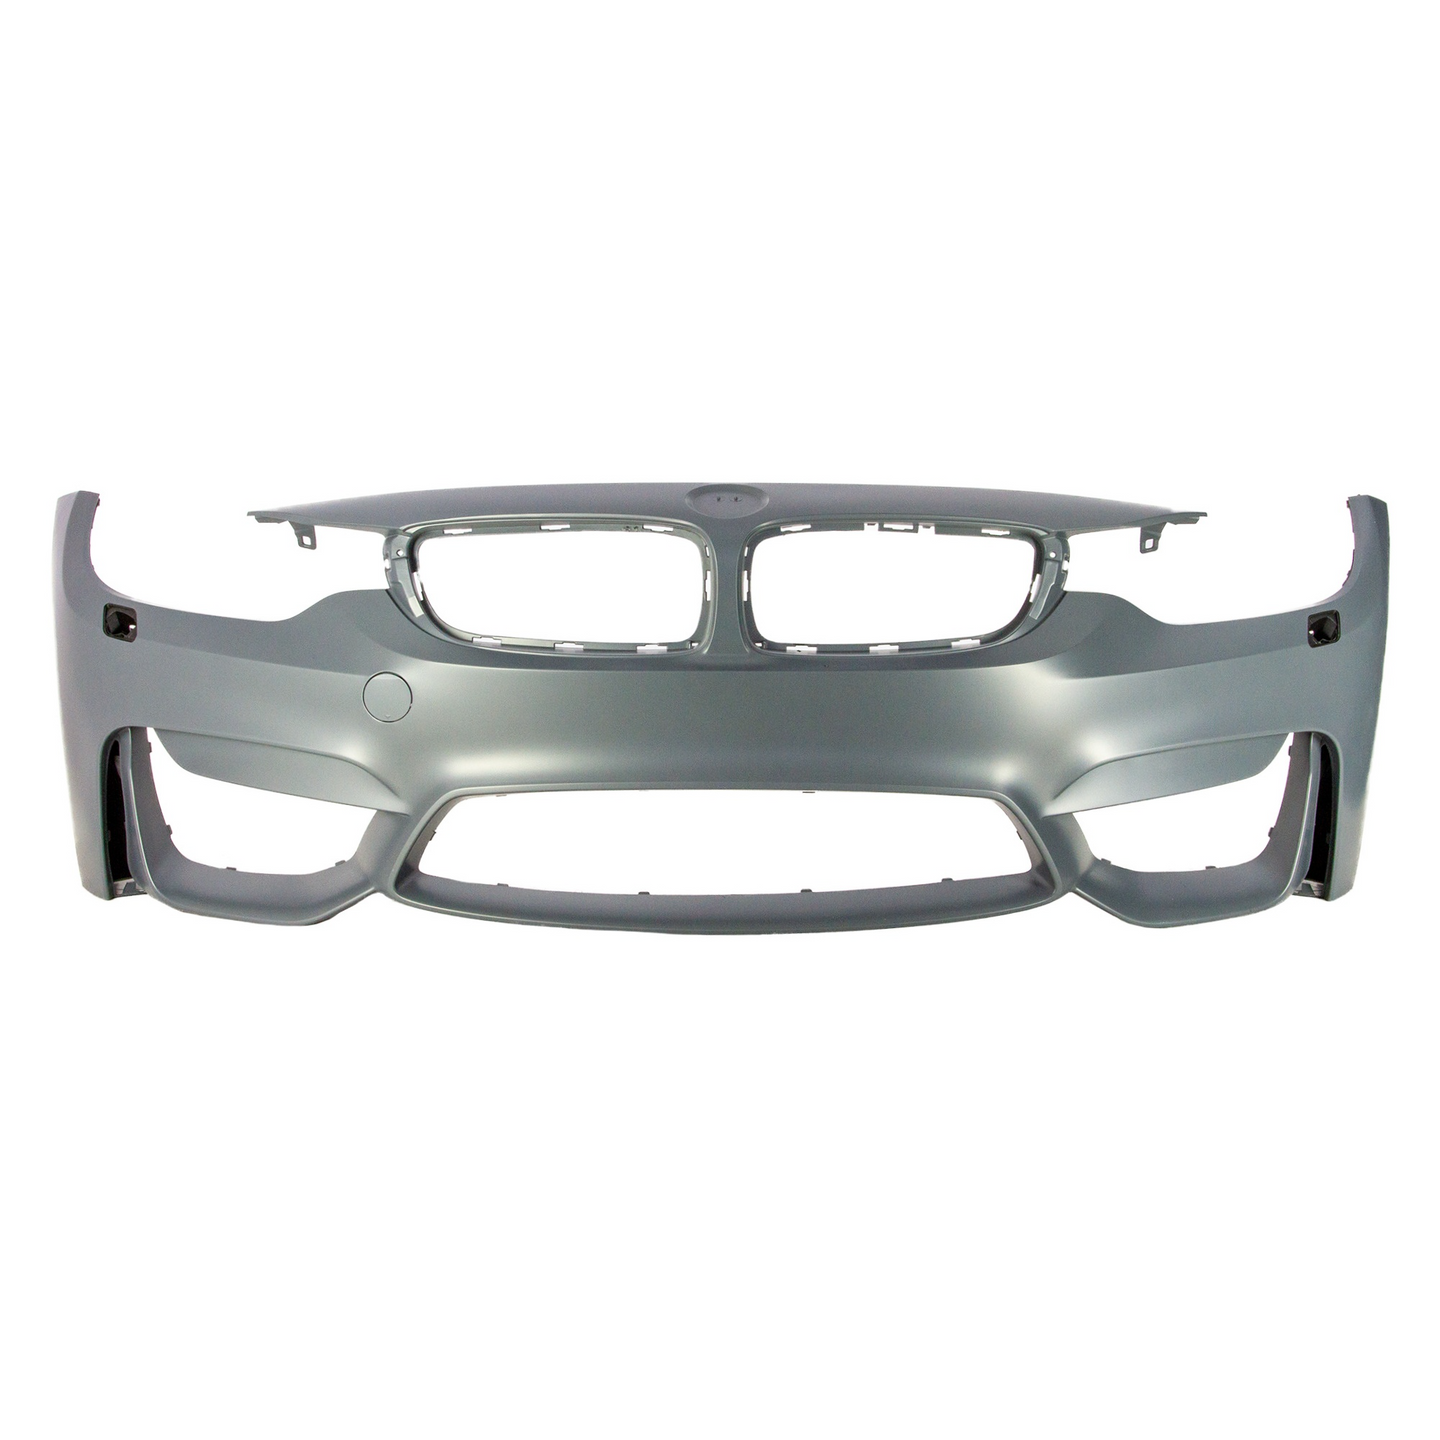 F8X M3 M4 FRONT BUMPER EURO OE REPLACEMENT